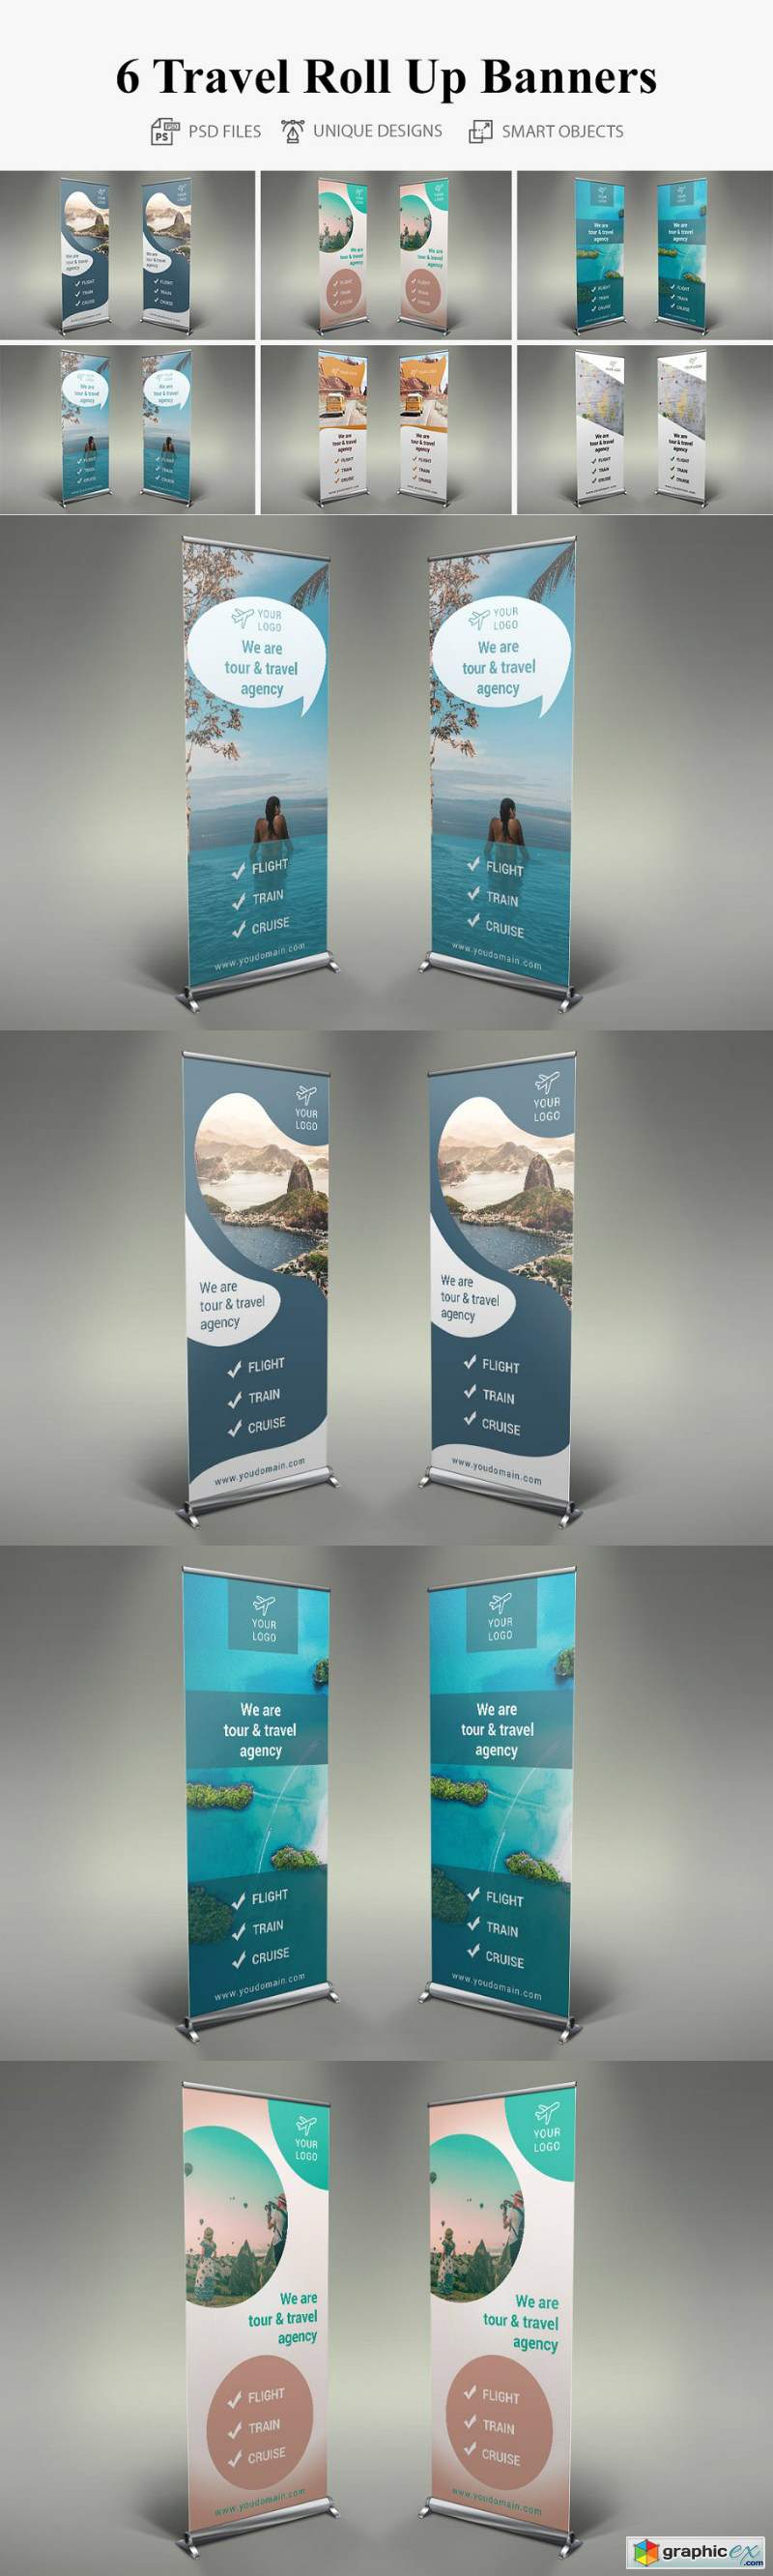 Travel Roll Up Banners